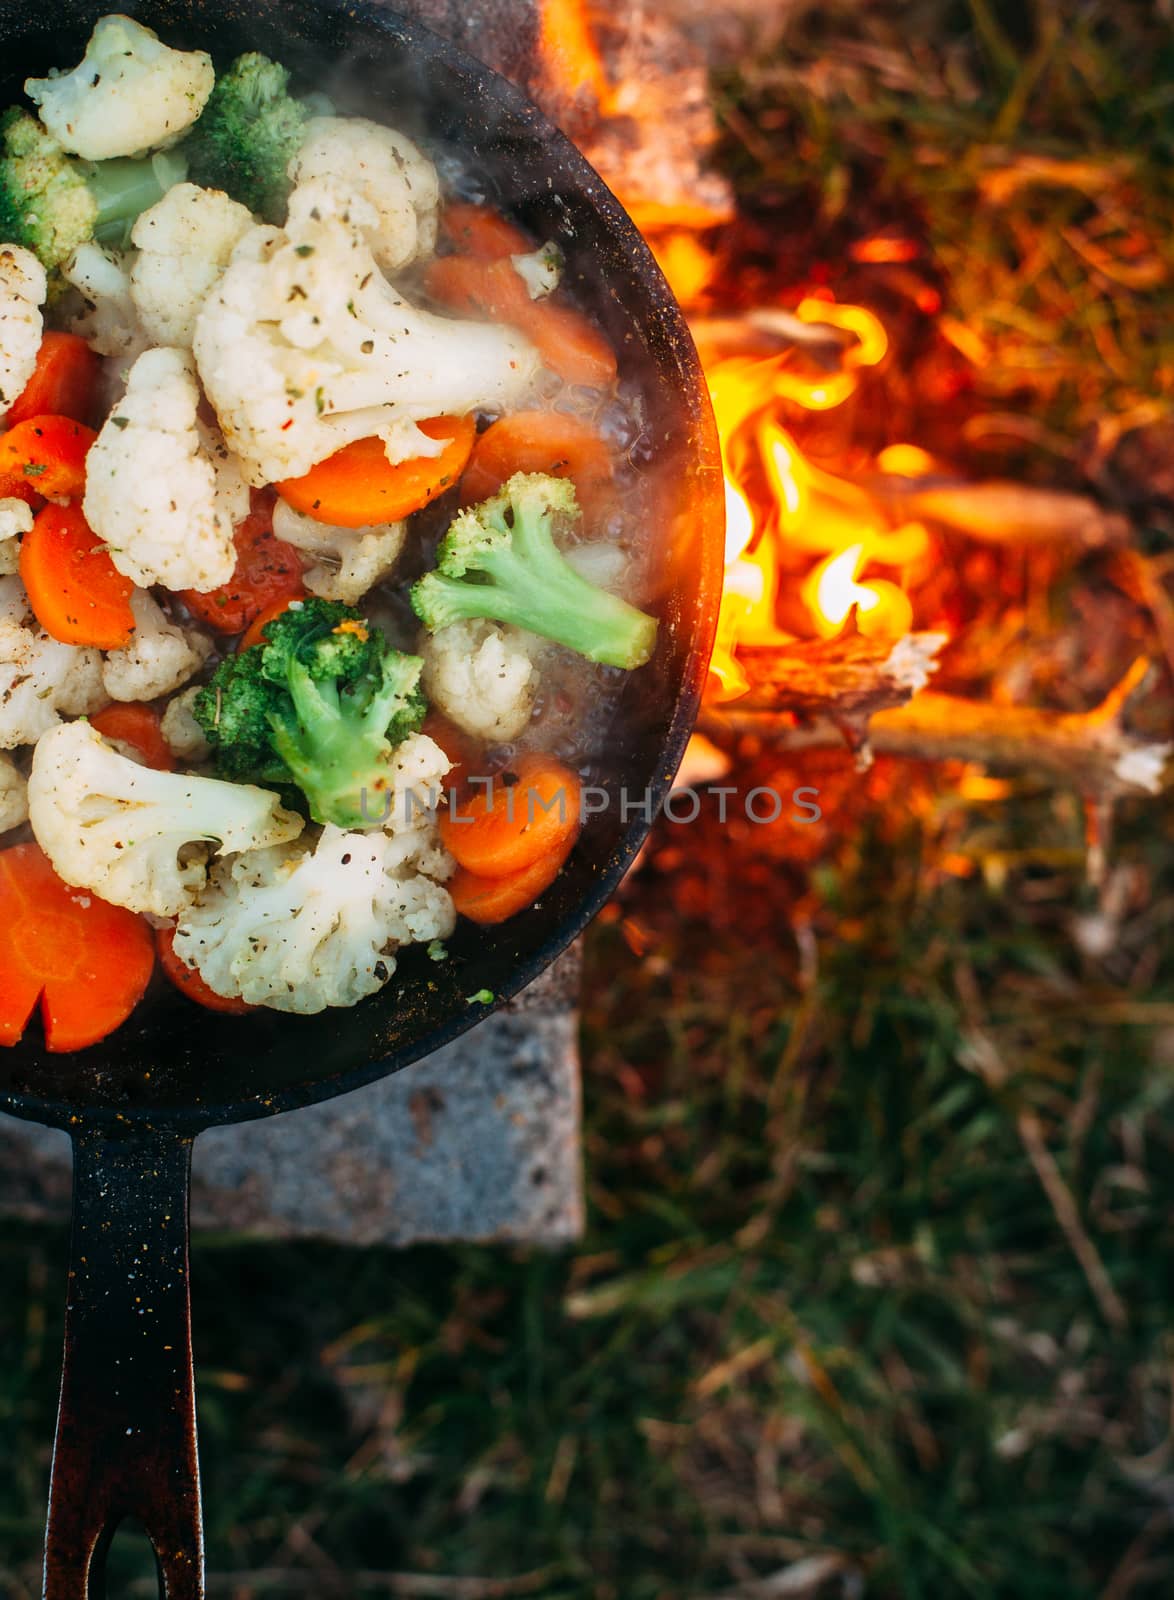 Cauliflower, broccoli and carrot in a pan. Cooking on an open fire. Outdoor food. Grilled vegetables. Food on a camping trip